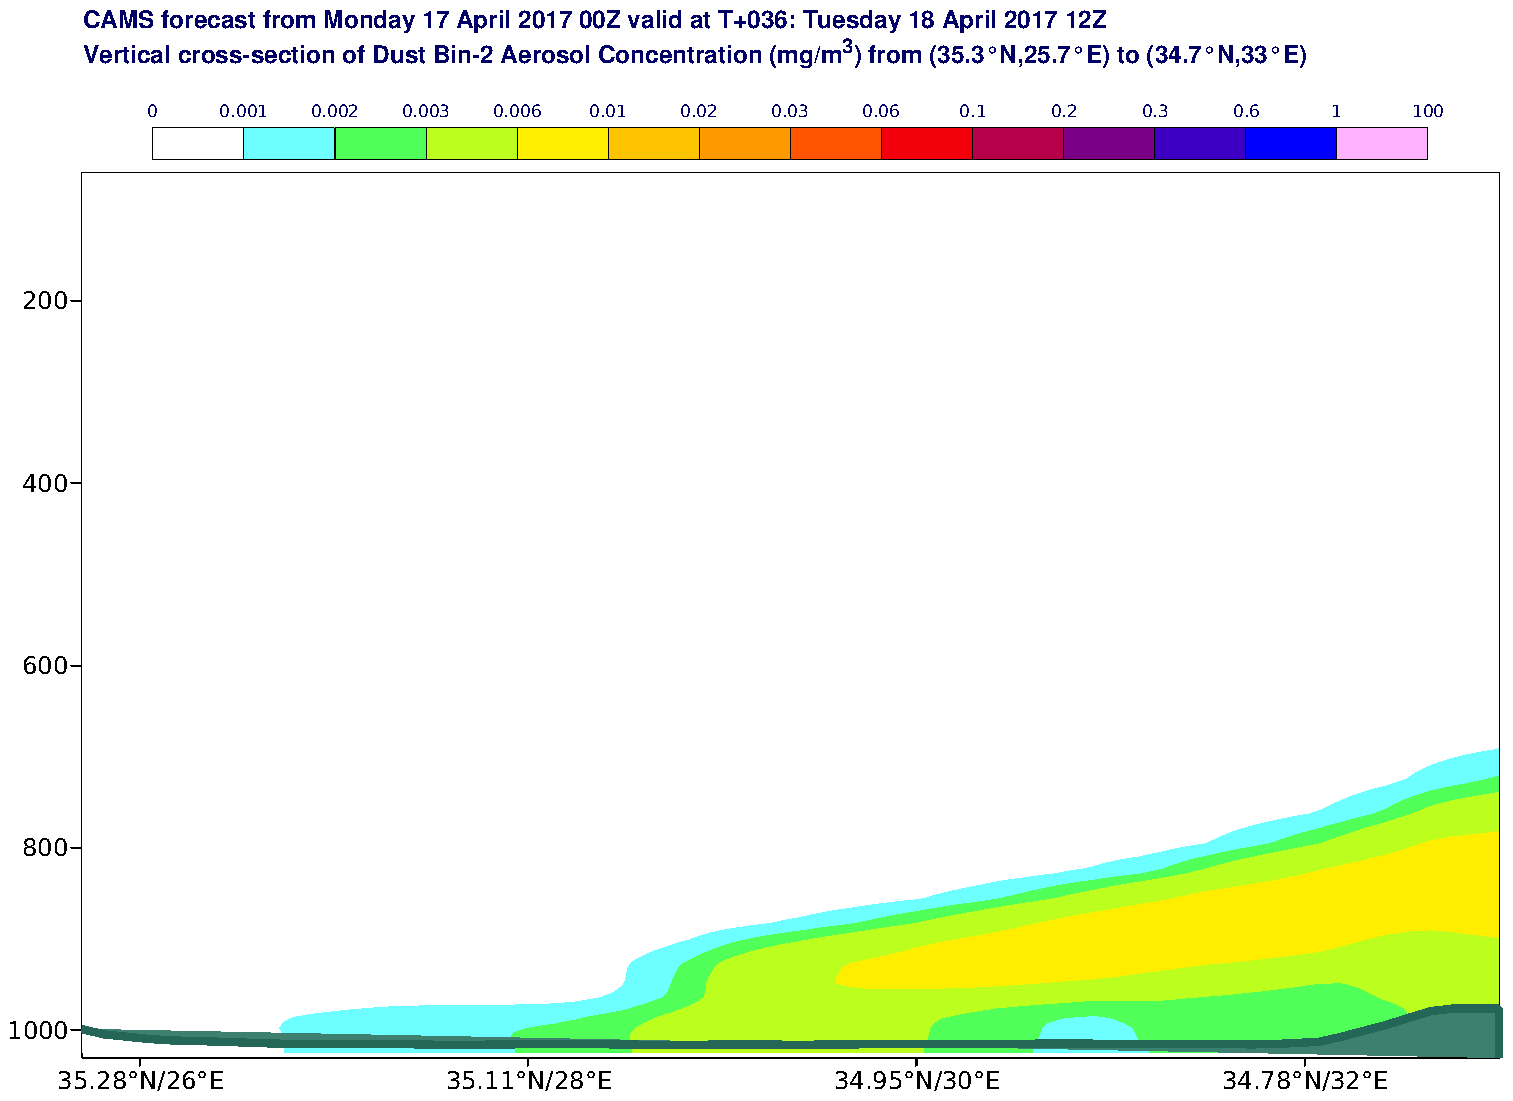 Vertical cross-section of Dust Bin-2 Aerosol Concentration (mg/m3) valid at T36 - 2017-04-18 12:00